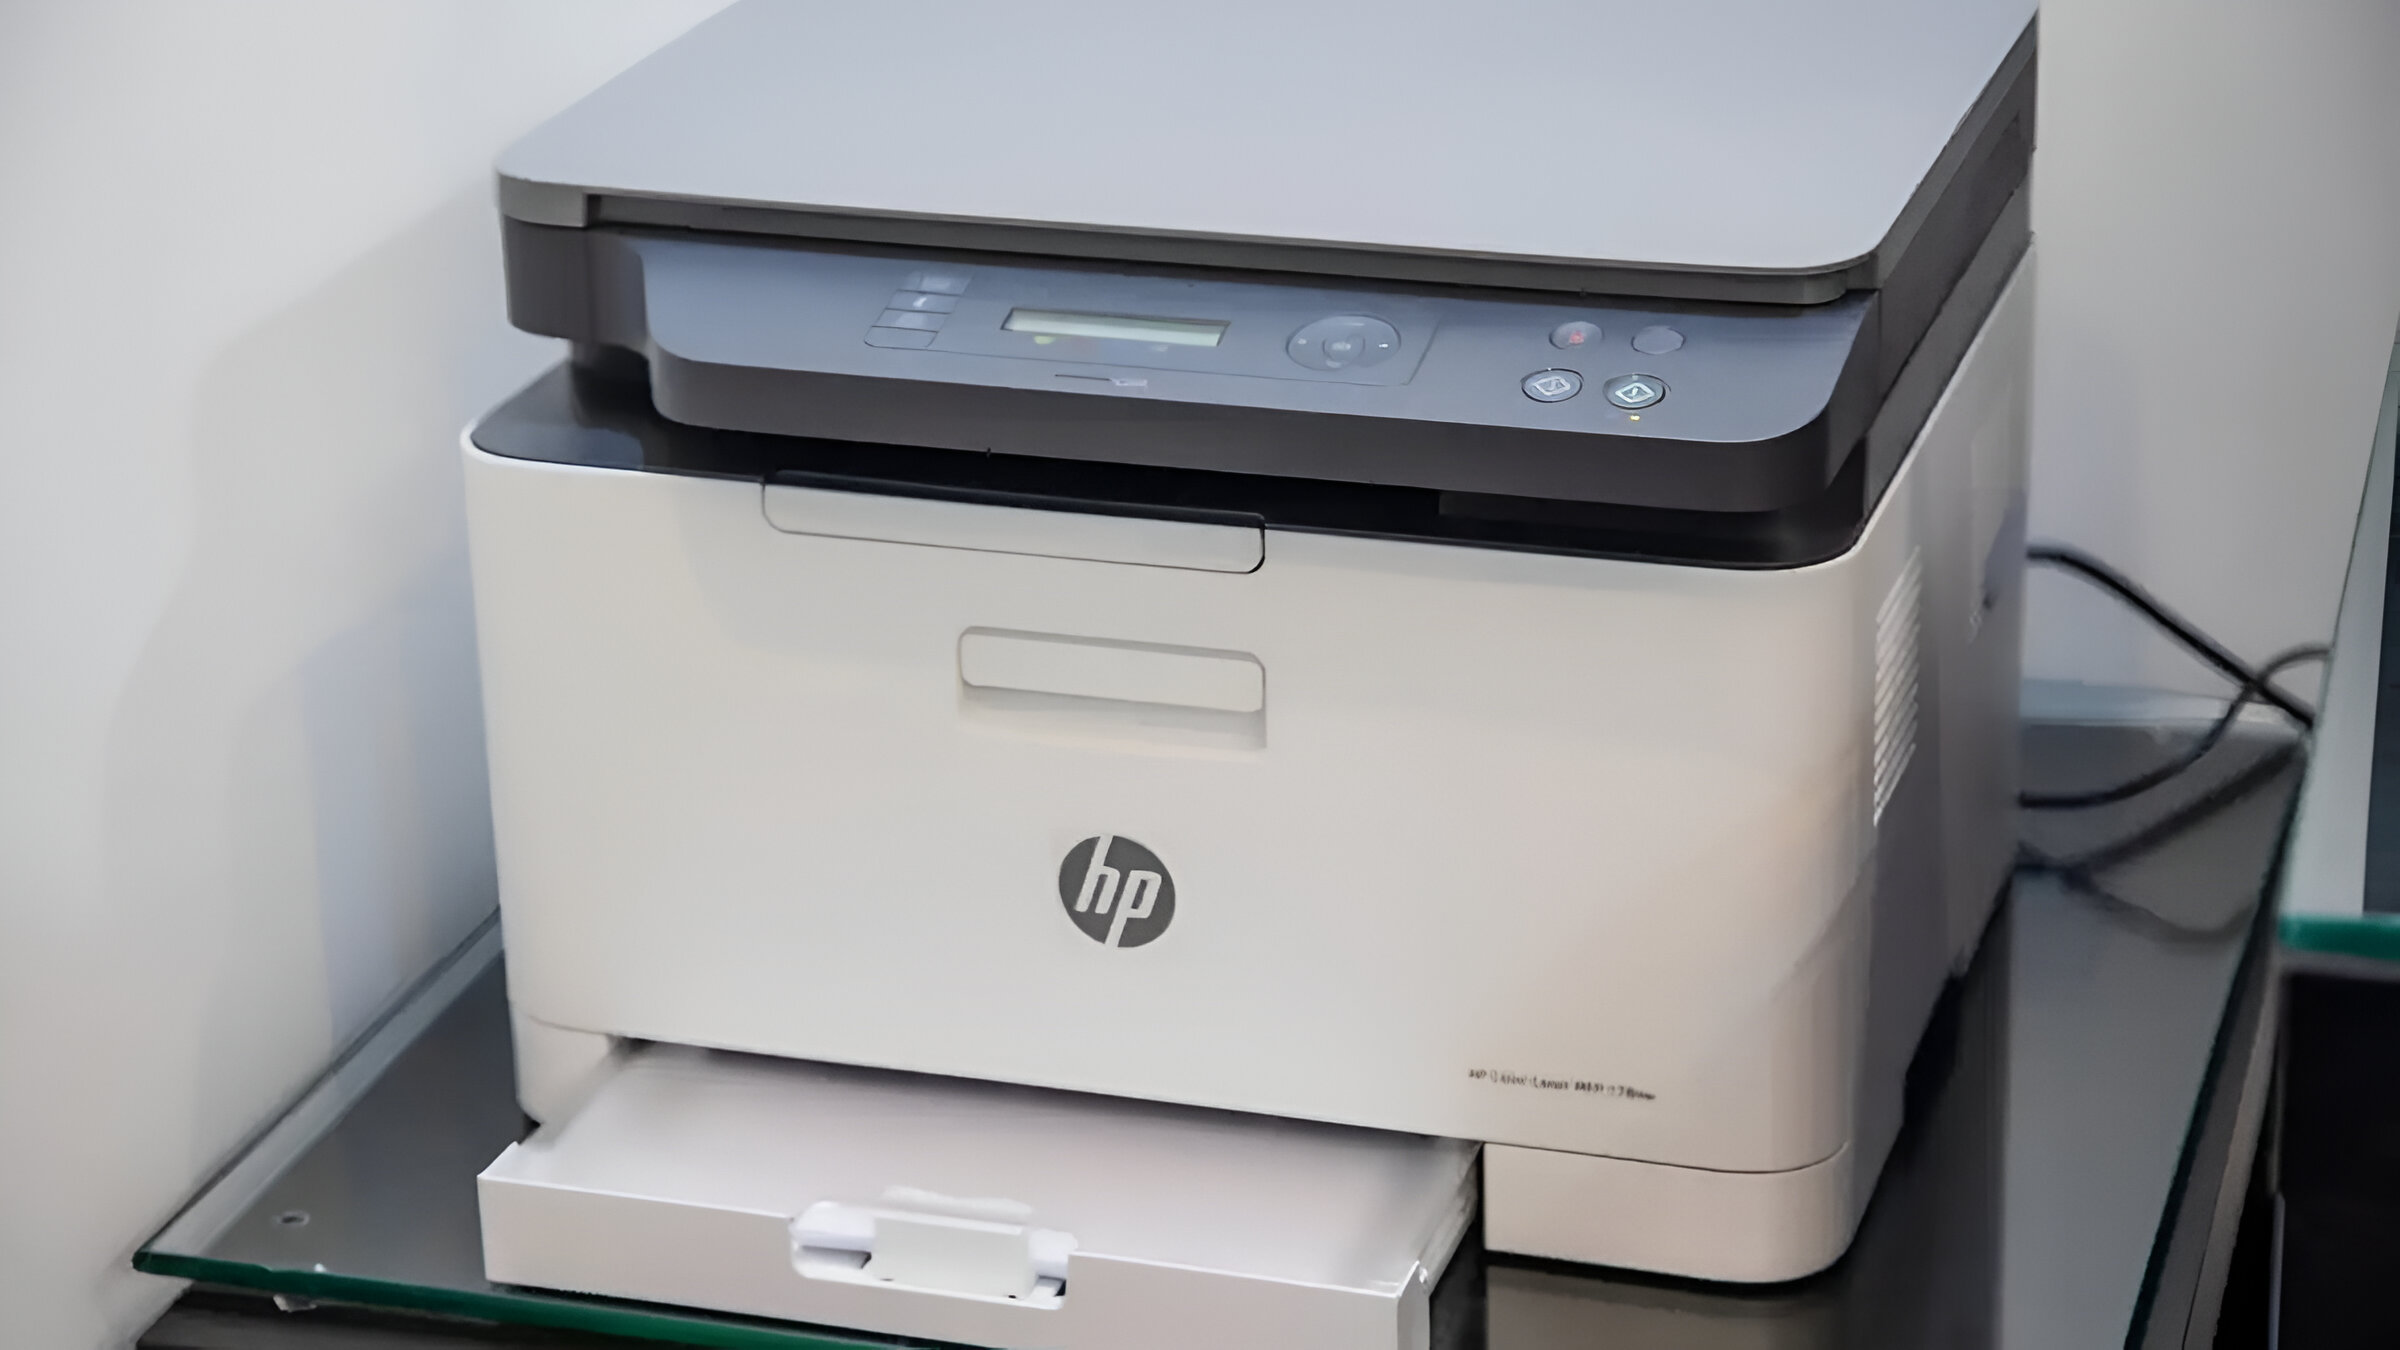 Printer Troubleshooting: Resolving Blinking Blue Light Issues On HP Printers